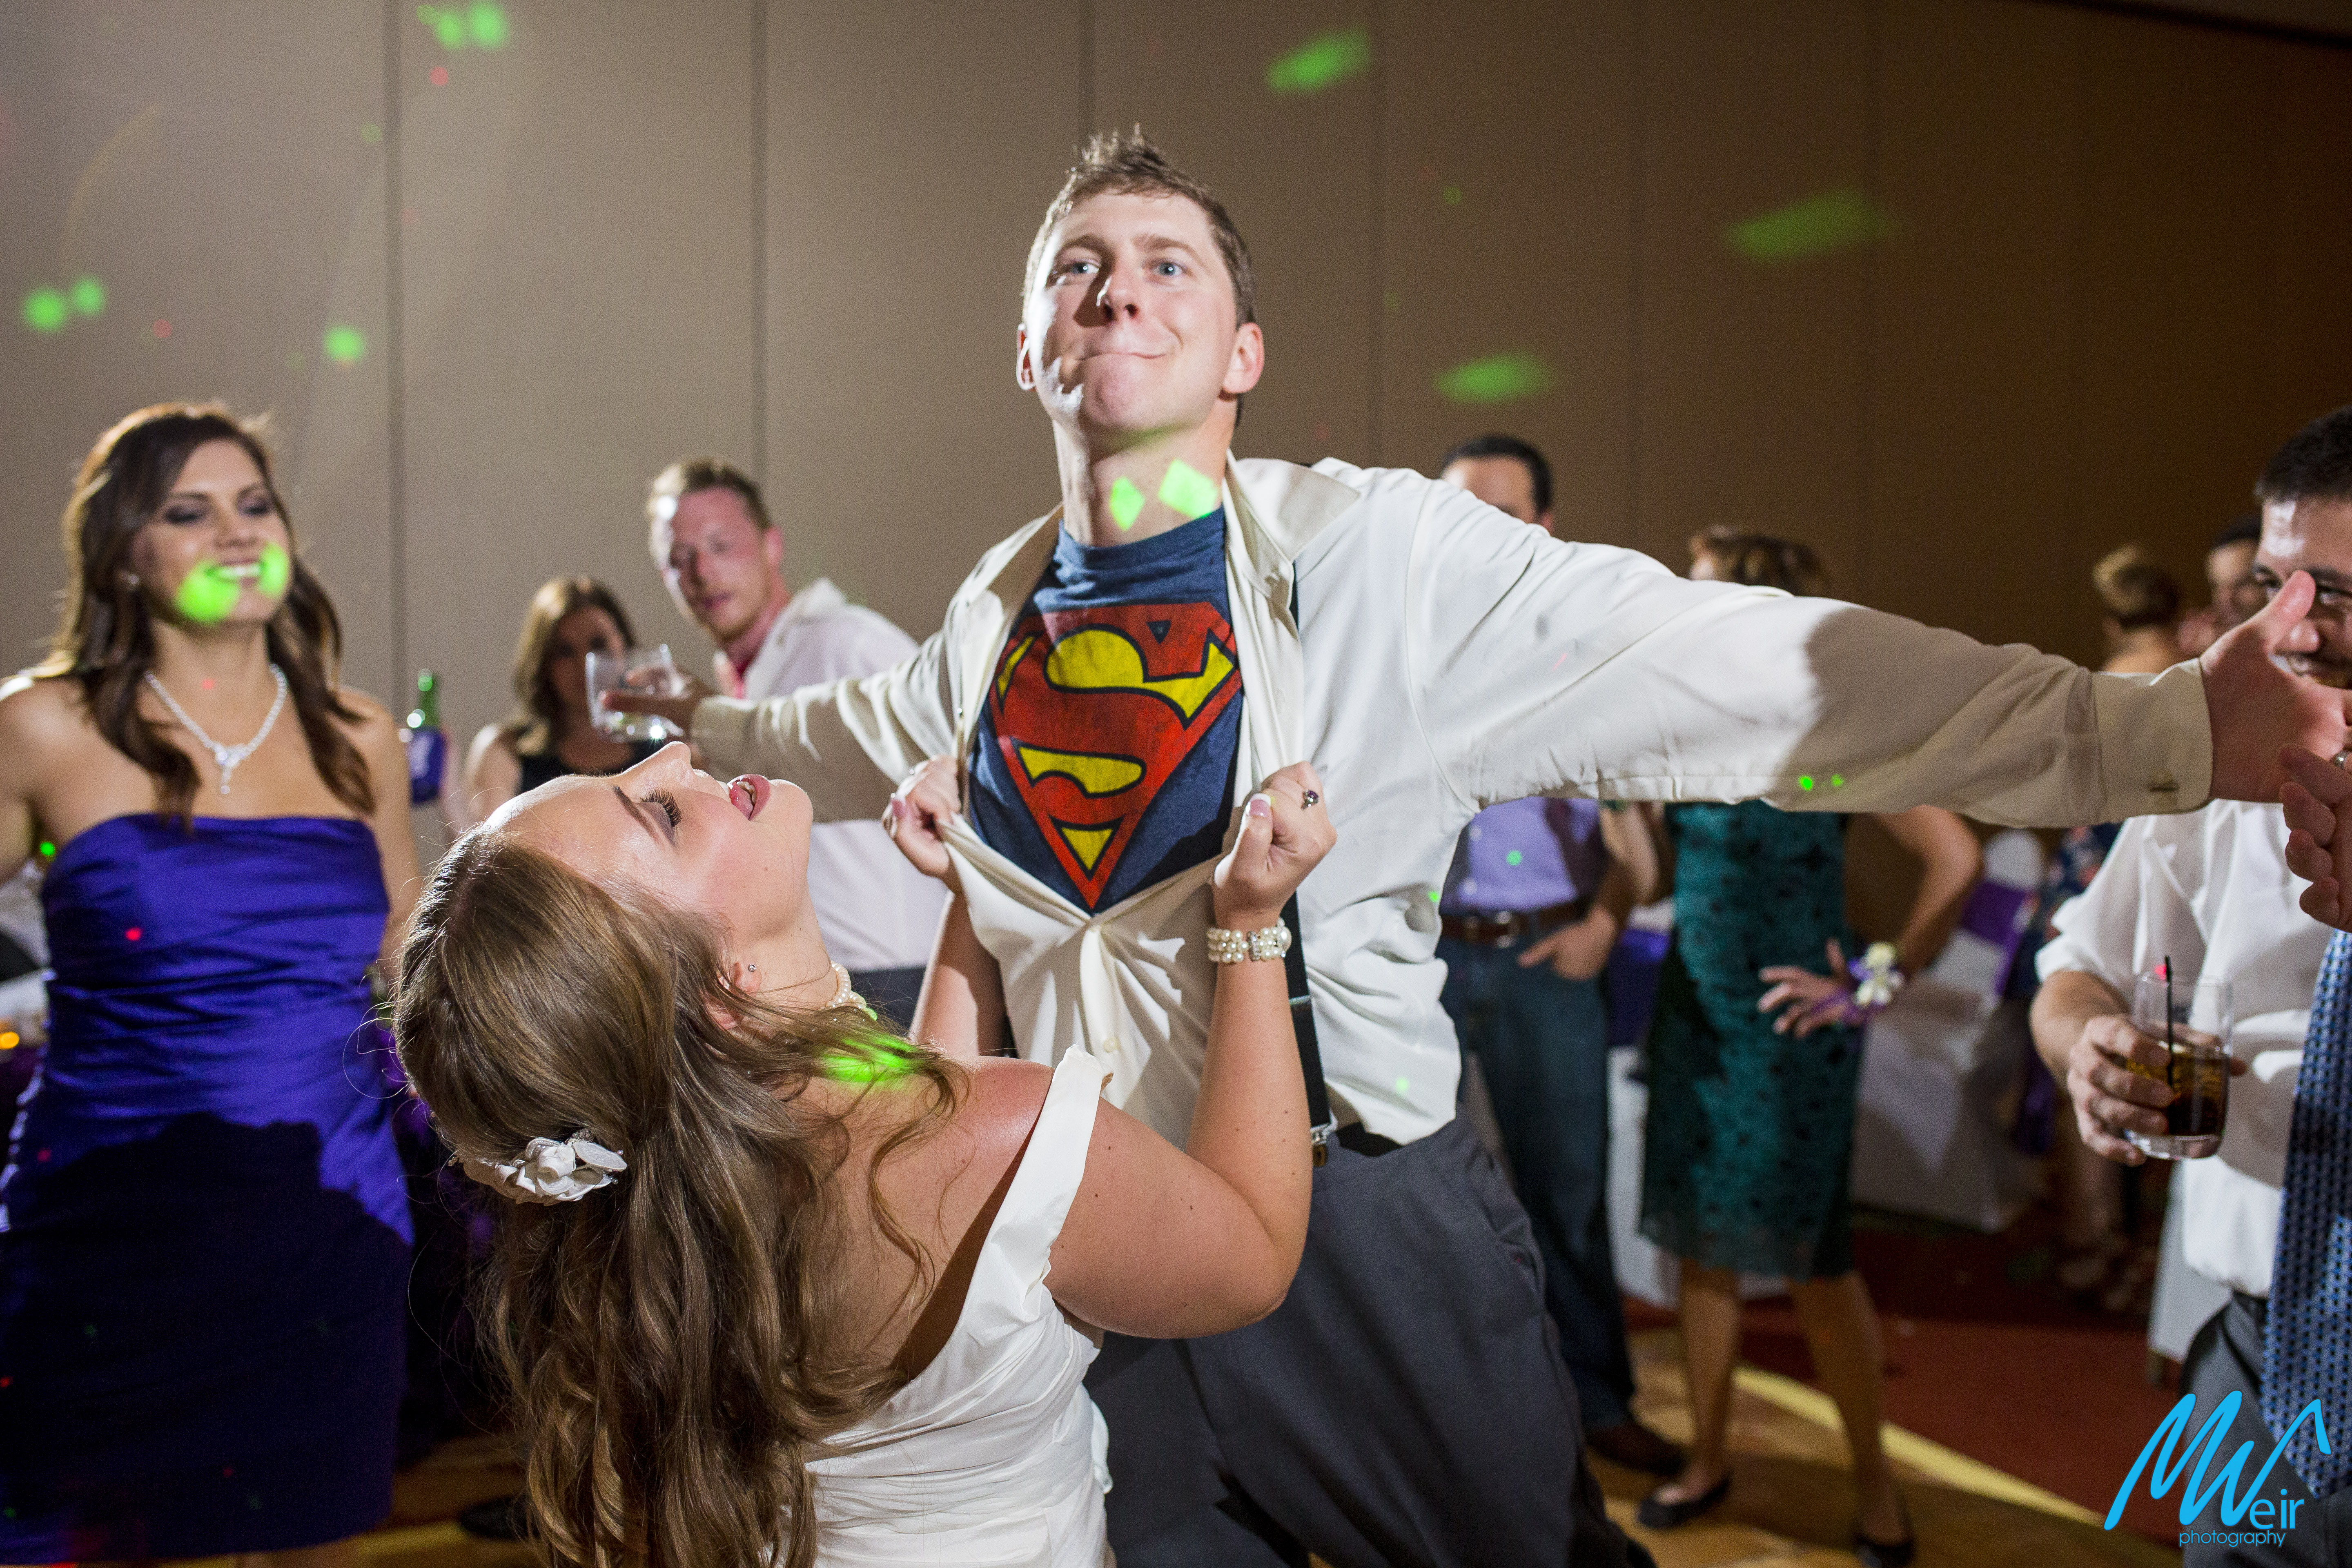 Bride opens grooms shirt to superman tshirt underneath while groom pretends to fly